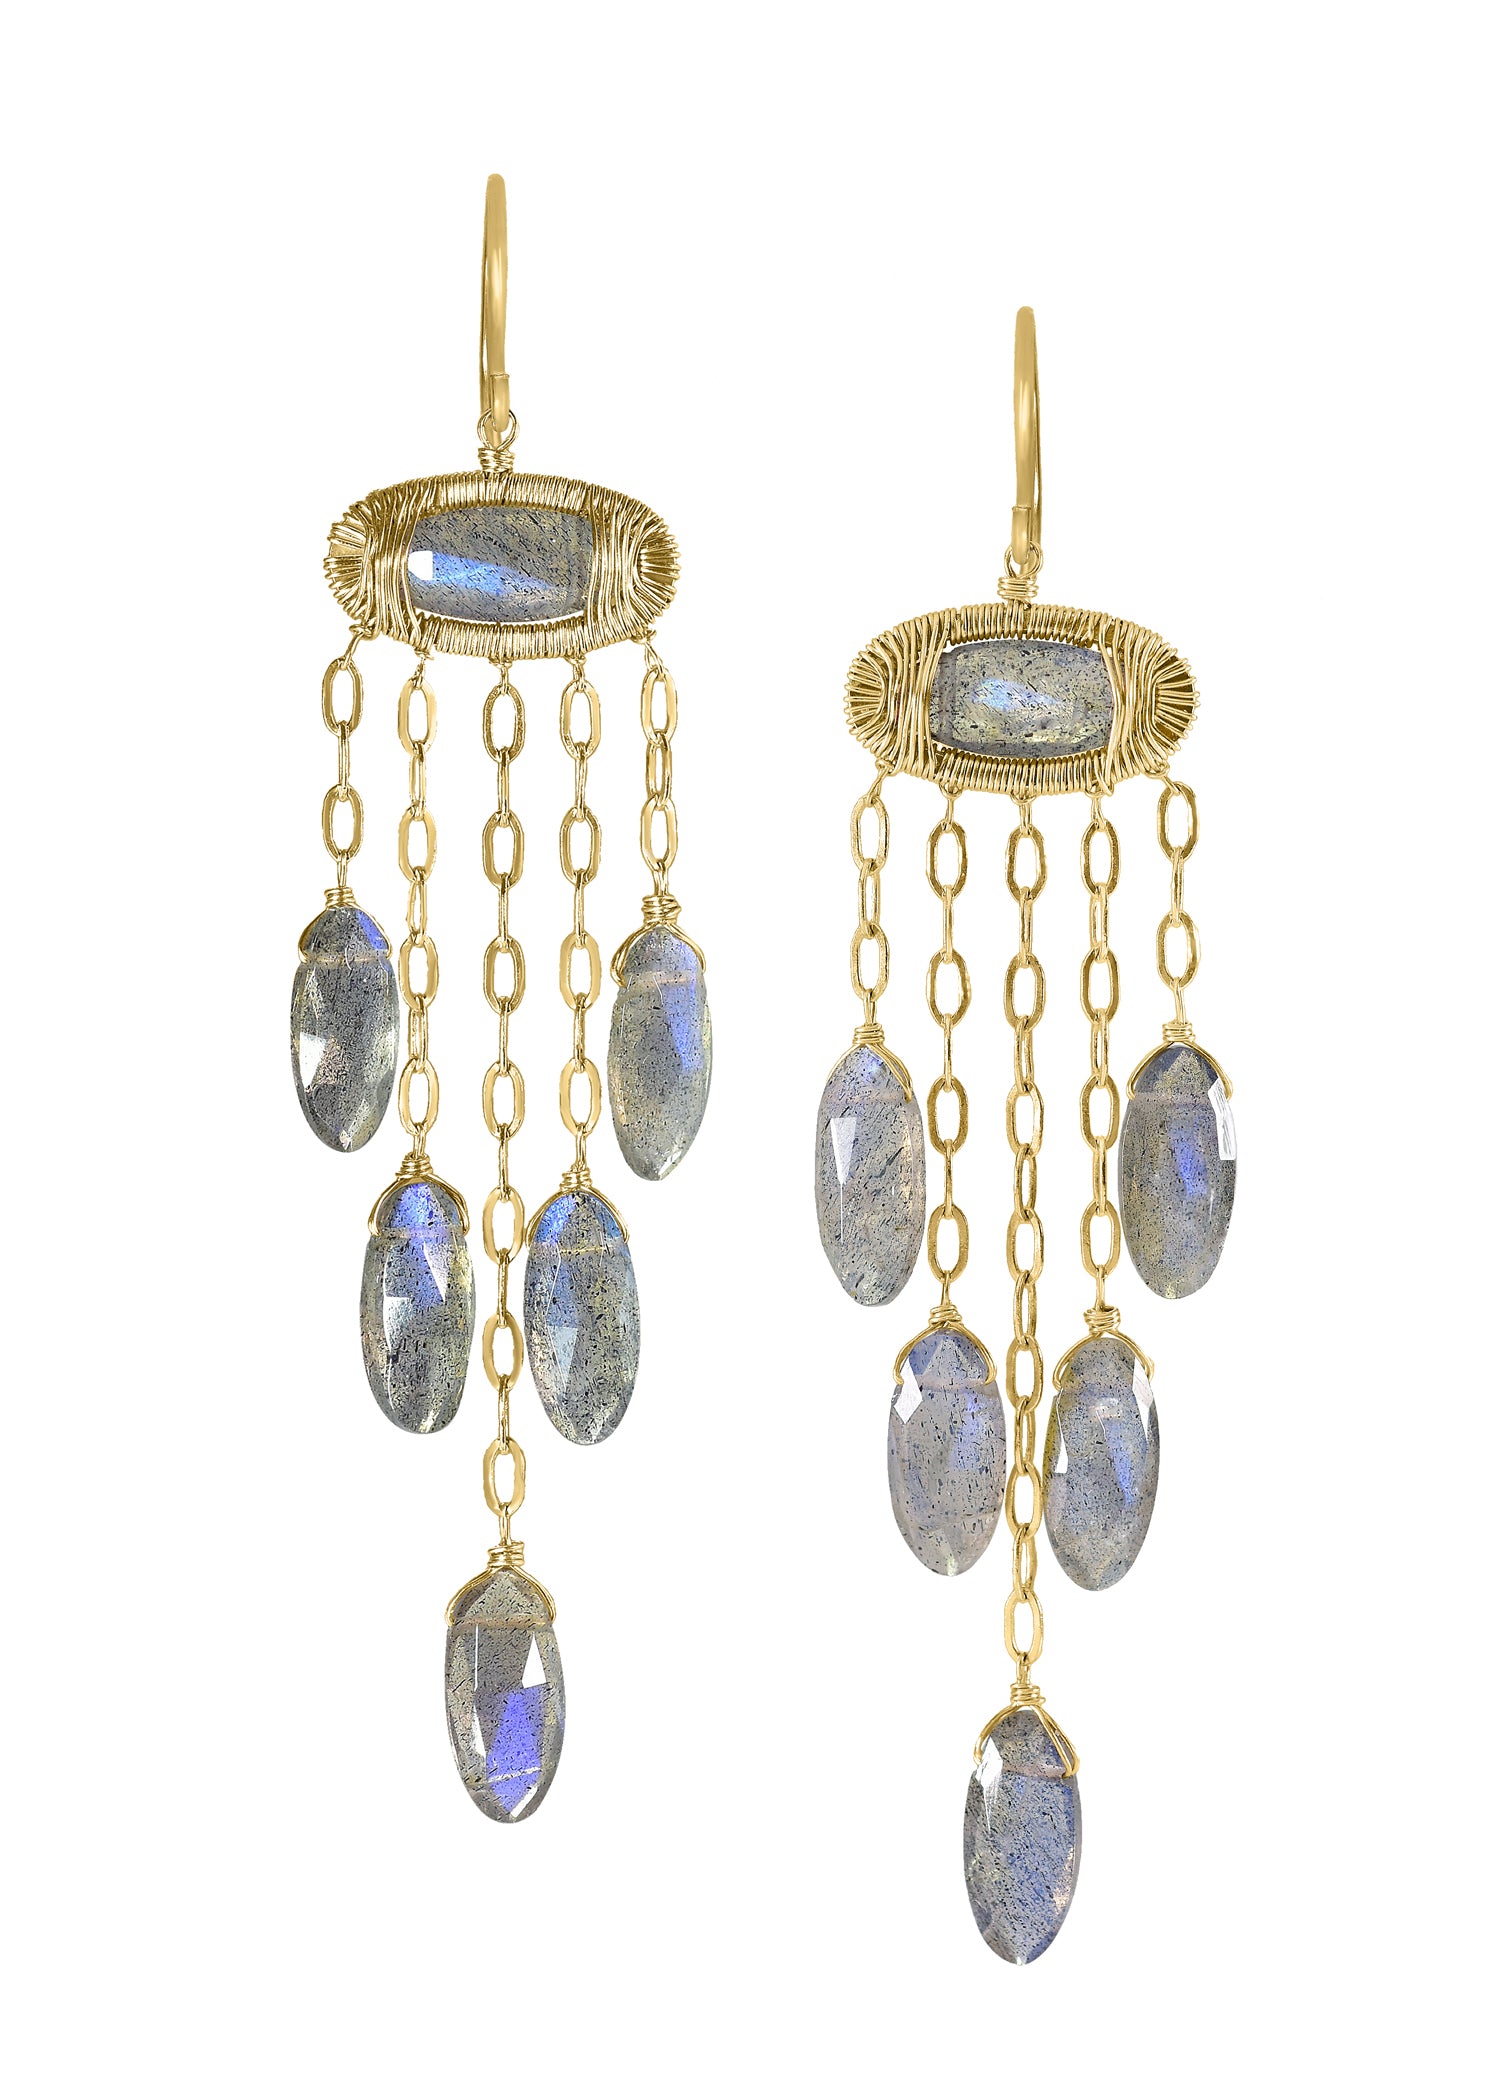 Labradorite 14k gold Earrings measure 2-11/16" in length (including the ear wires) and 5/8" in width across the top pendant Handmade in our Los Angeles studio